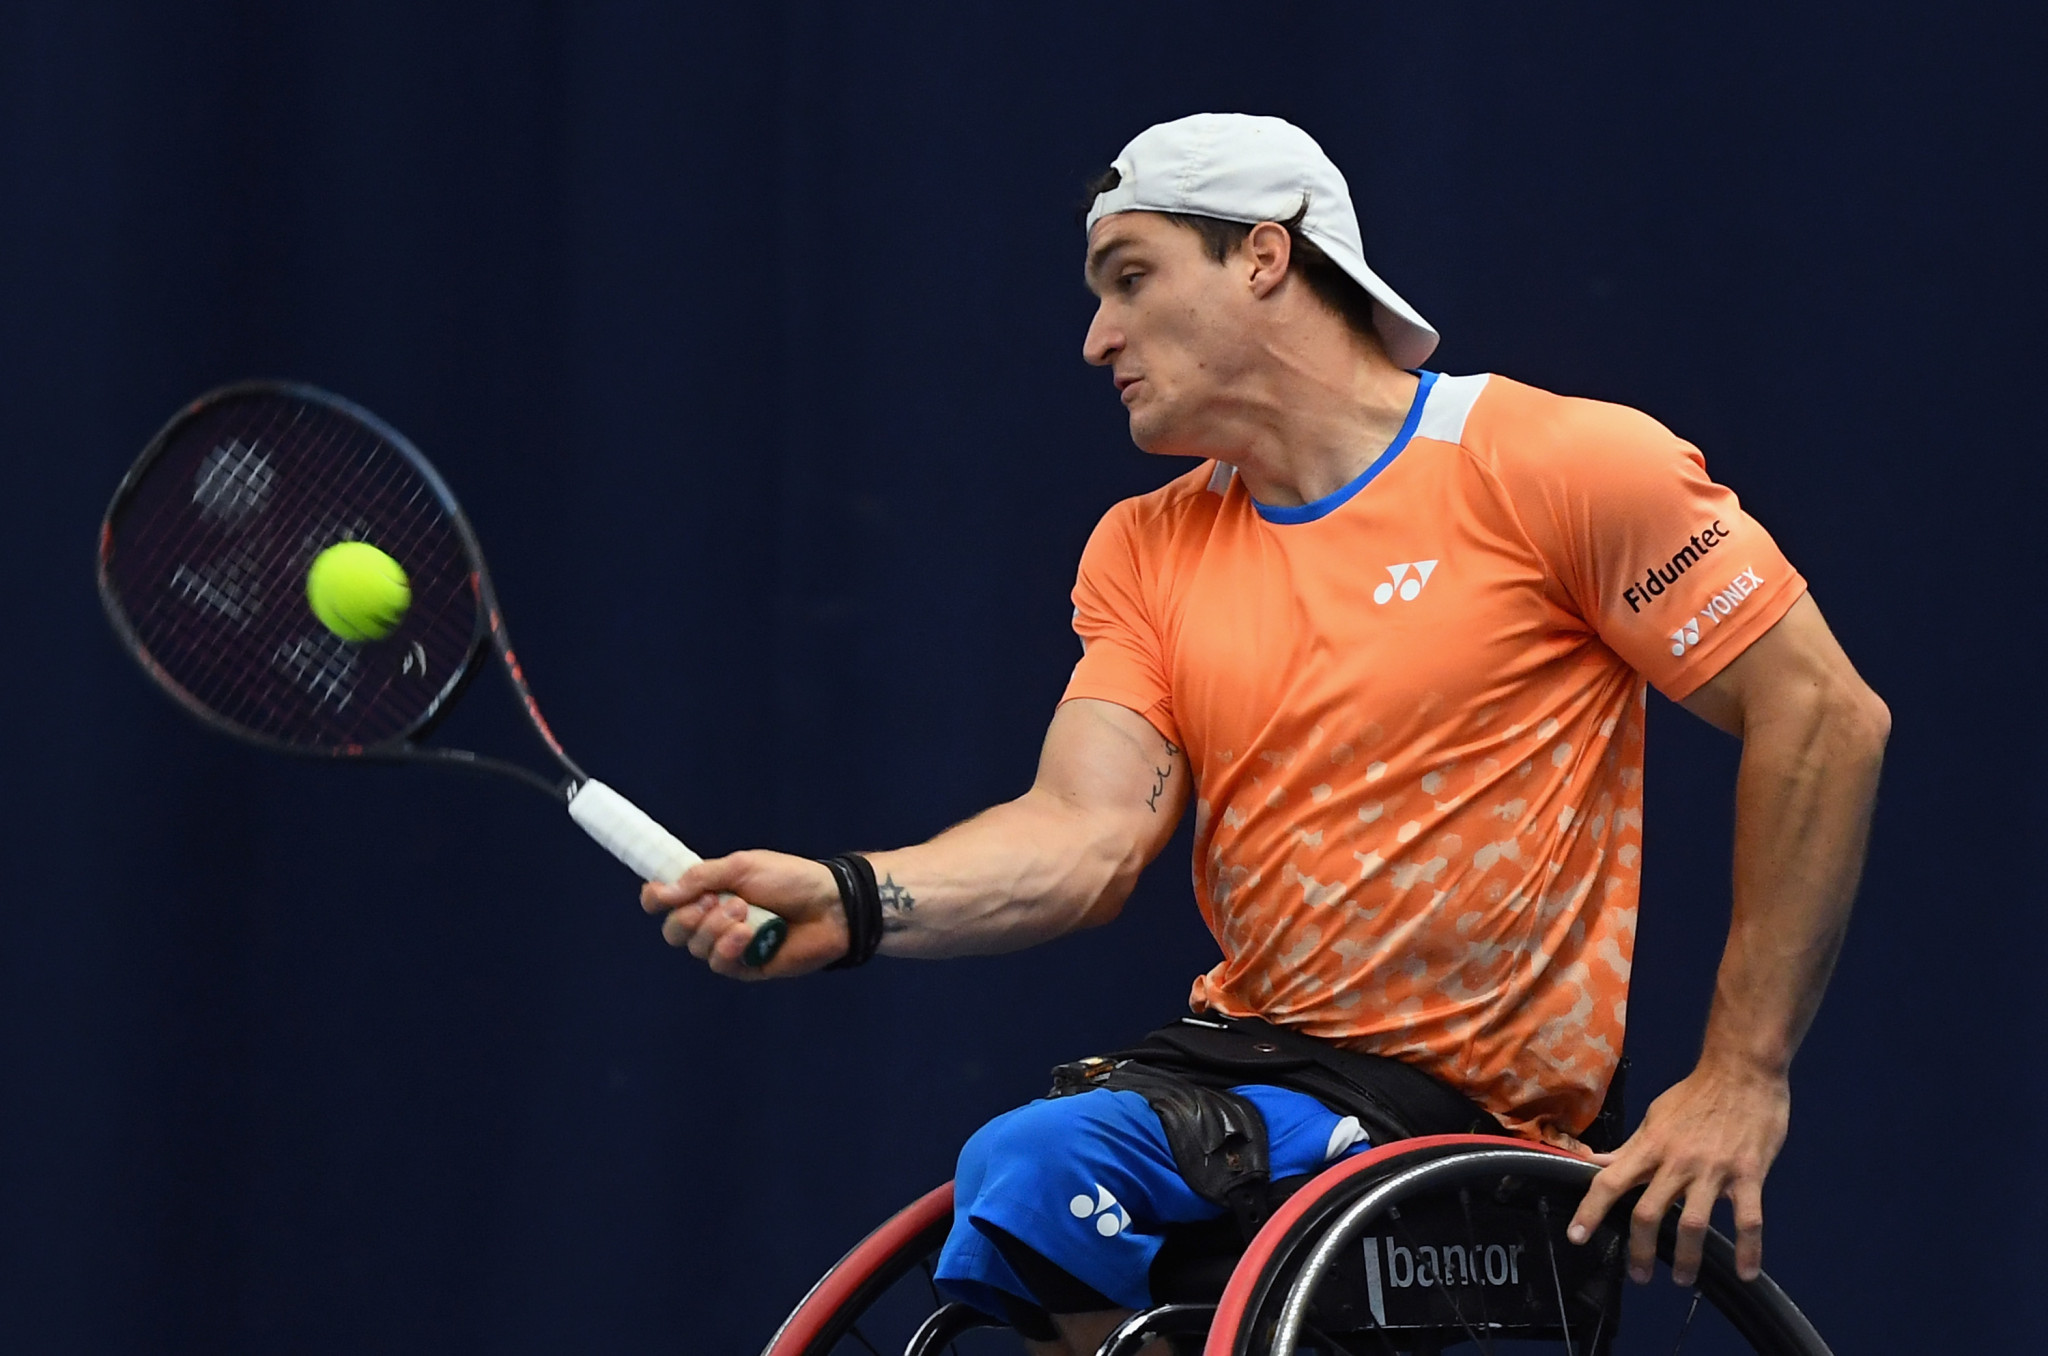 Gustavo Fernandez earned a second straight win in the men's competition at the Wheelchair Tennis Masters in Orlando ©Getty Images